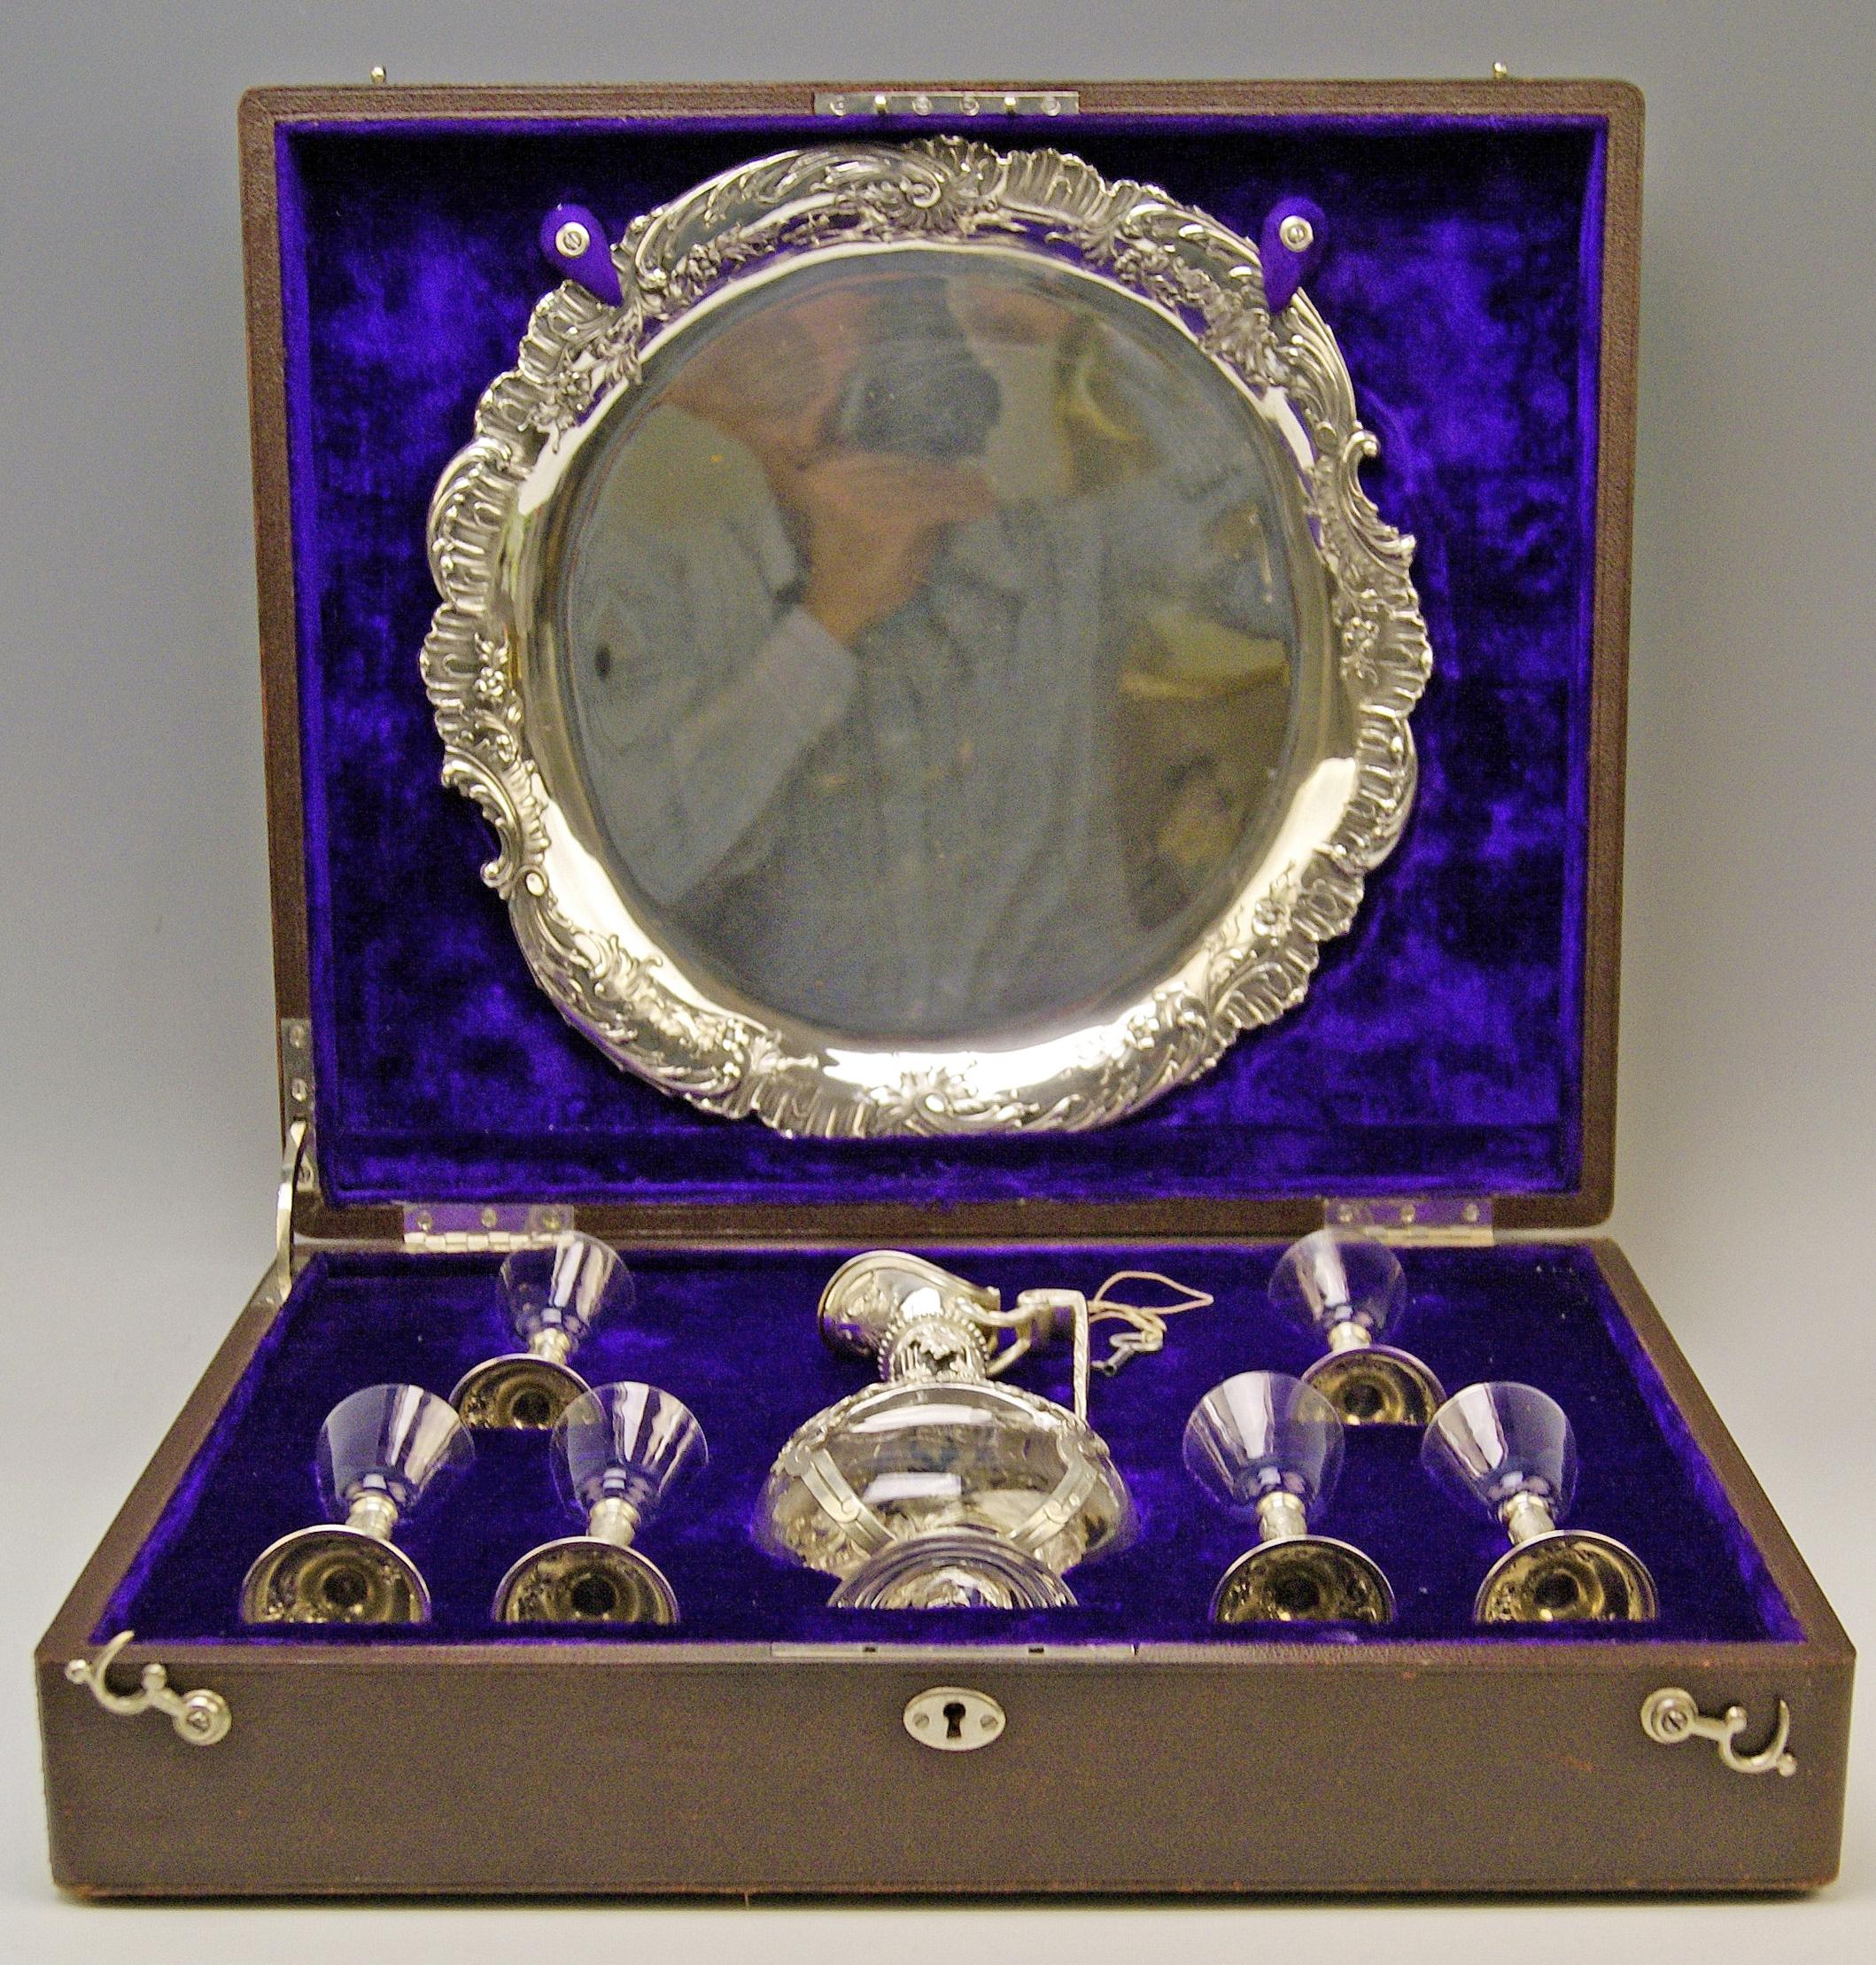 Silver Austrian gorgeous liqueur set of most elegant appearance.

Particular feature:
Most probably one-off production / special design in original casket, manufactured 1906 = there is a metal plaque attached to casket's lid with referring date.